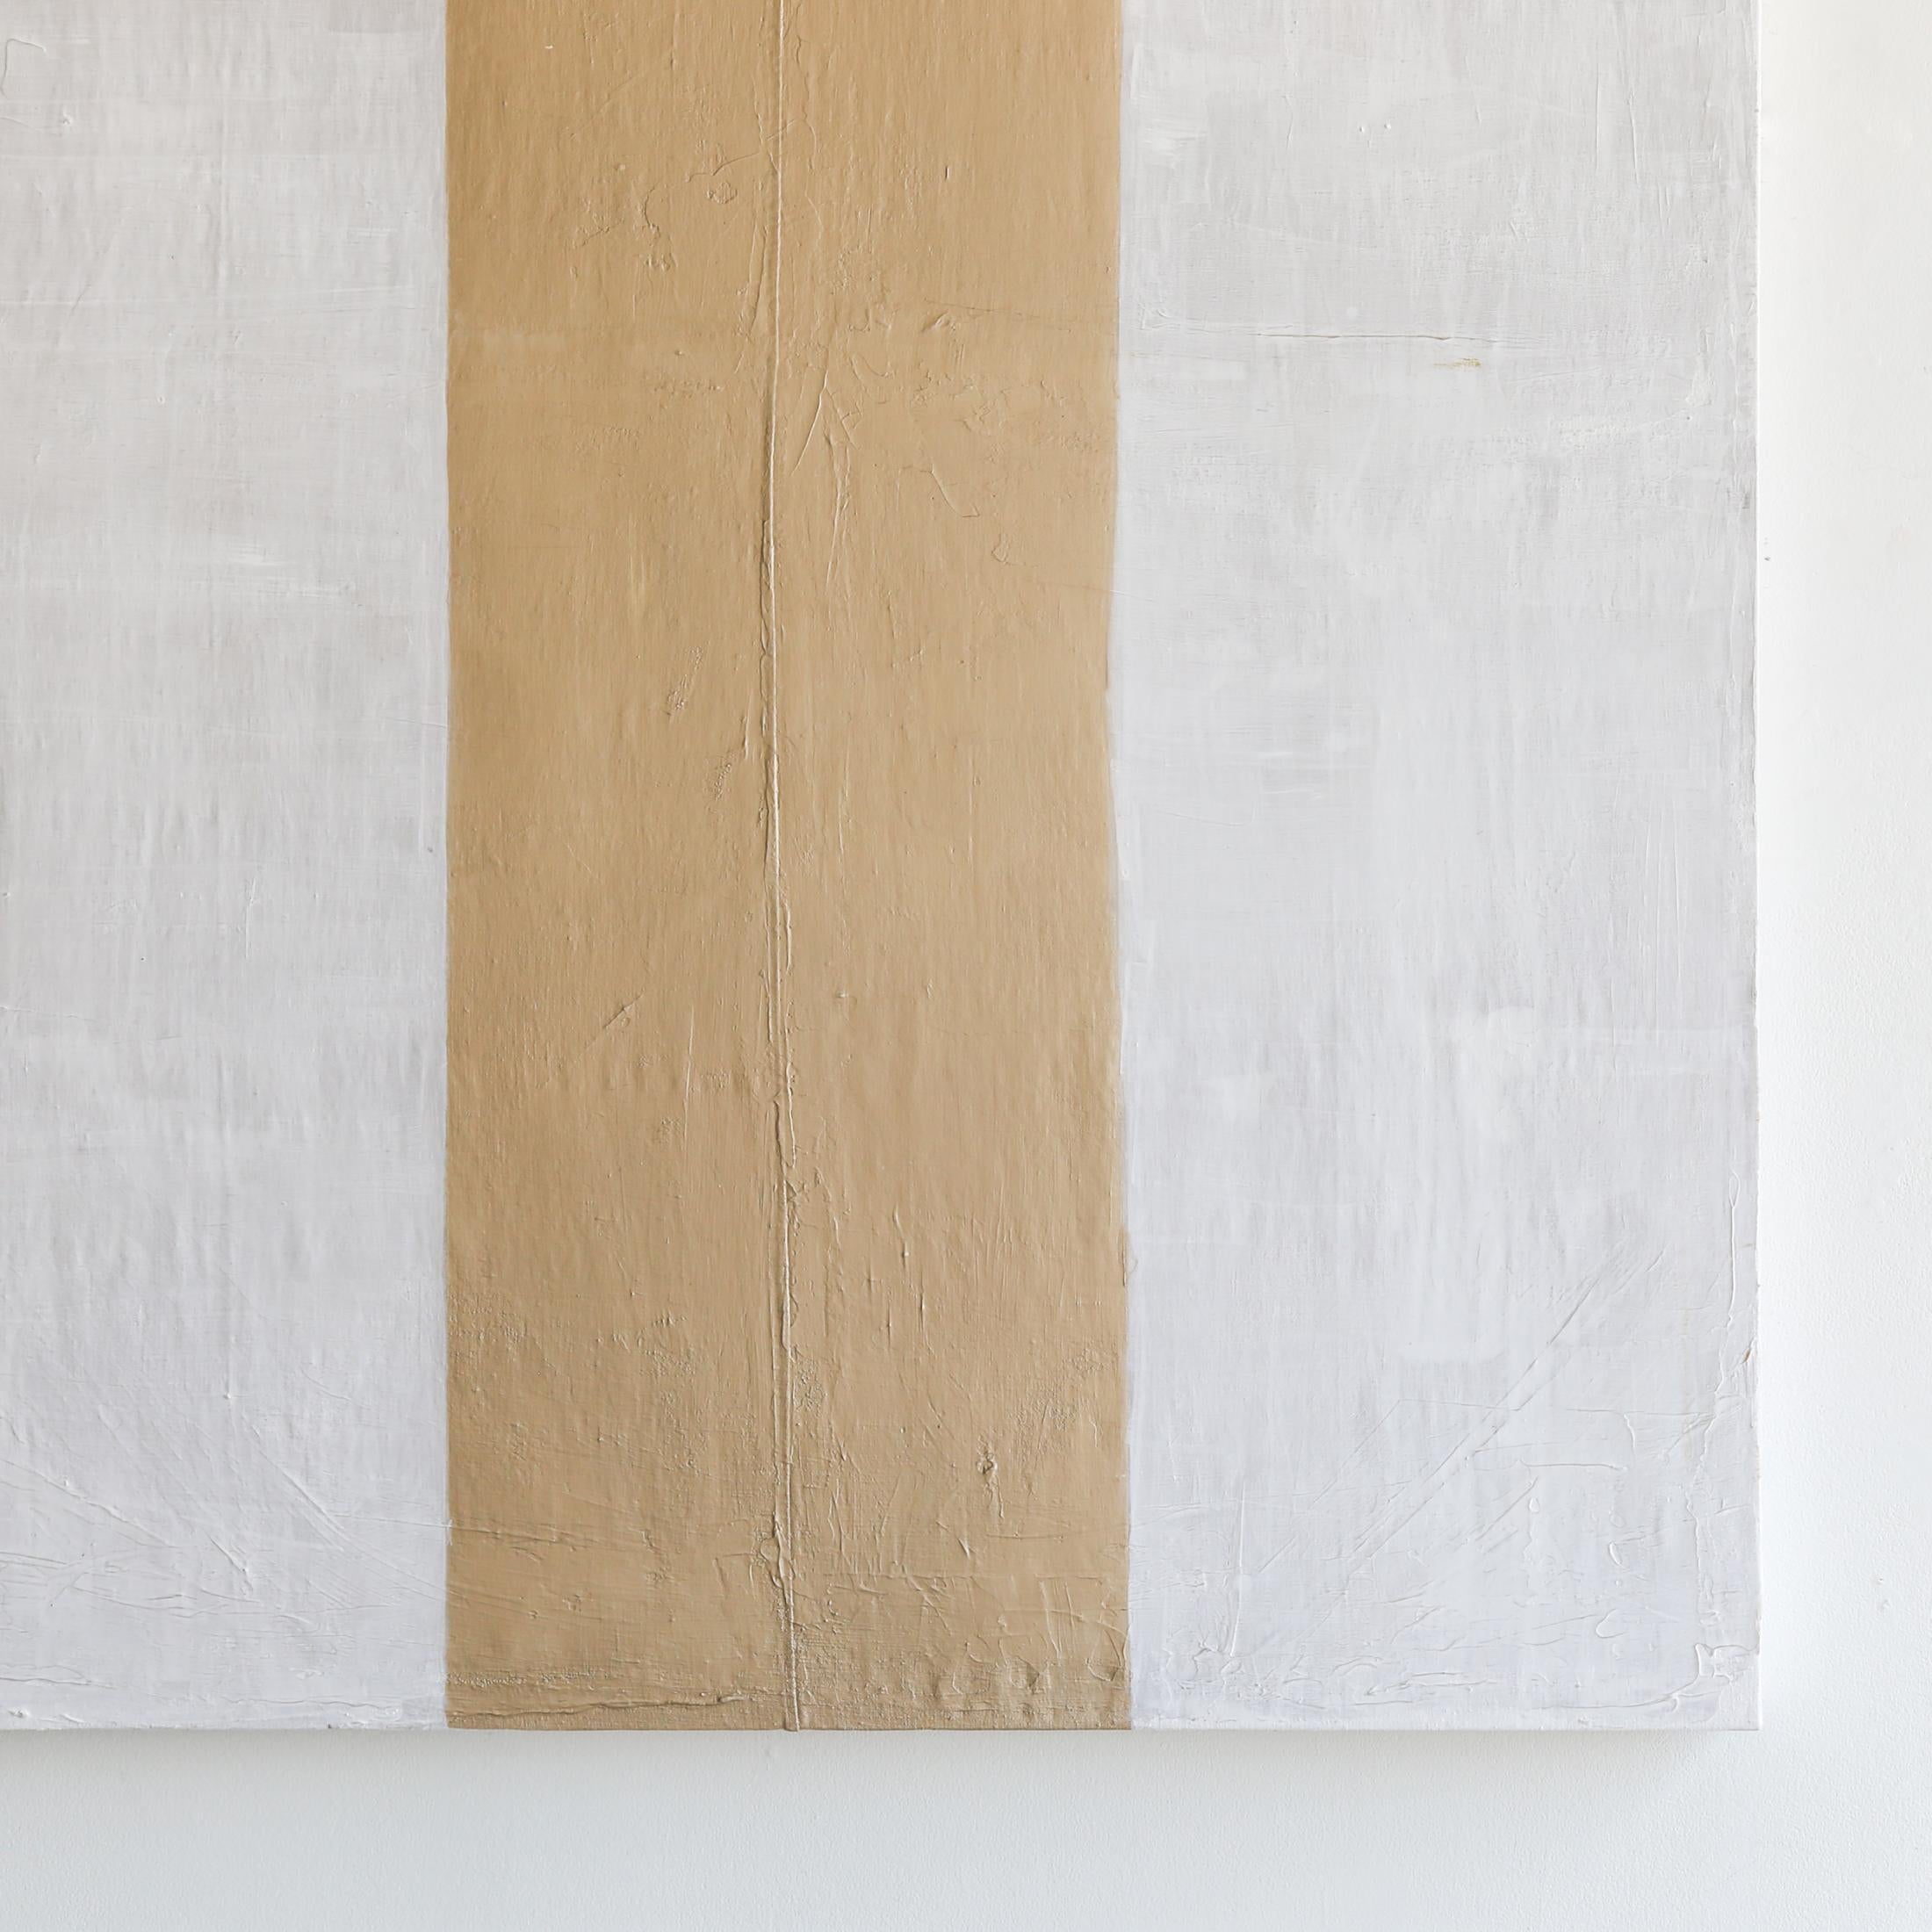 Sognare I by artist Kim Fonder is a abstract contemporary white, grey, and gold mixed media on burlap painting that has texture and is minimal. This painting meausures 67 x 49 and is priced at $5,900.

Kim Fonder loves texture and touch. Her